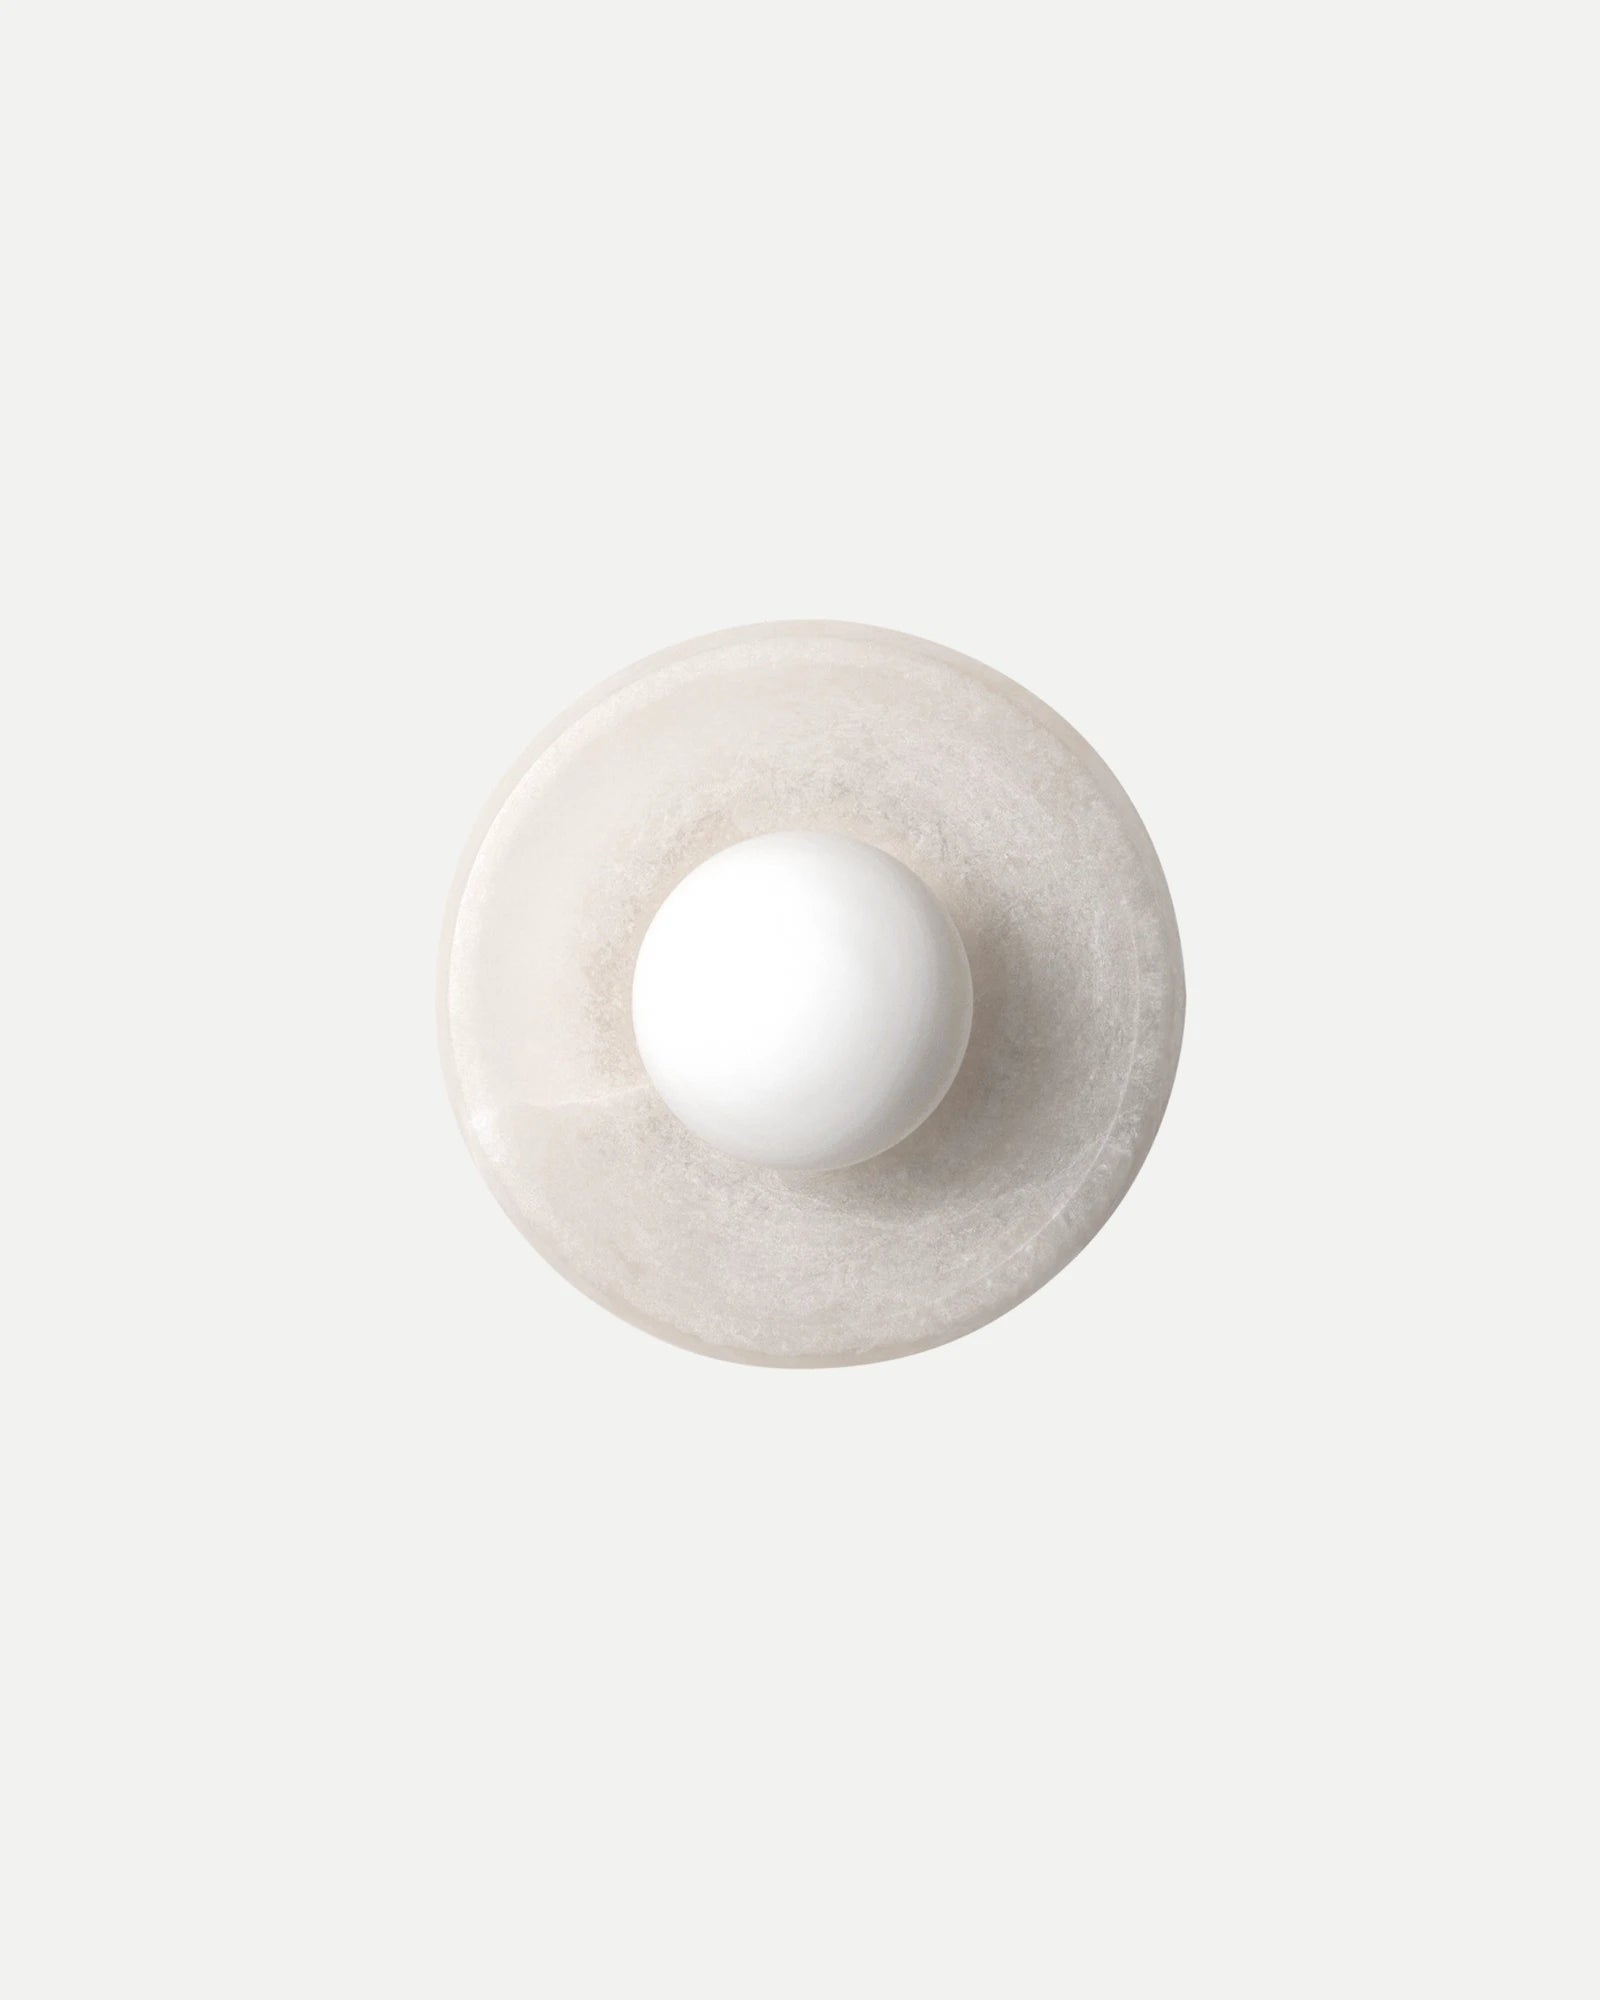 Orli Alabaster Wall Light | Nook Collections